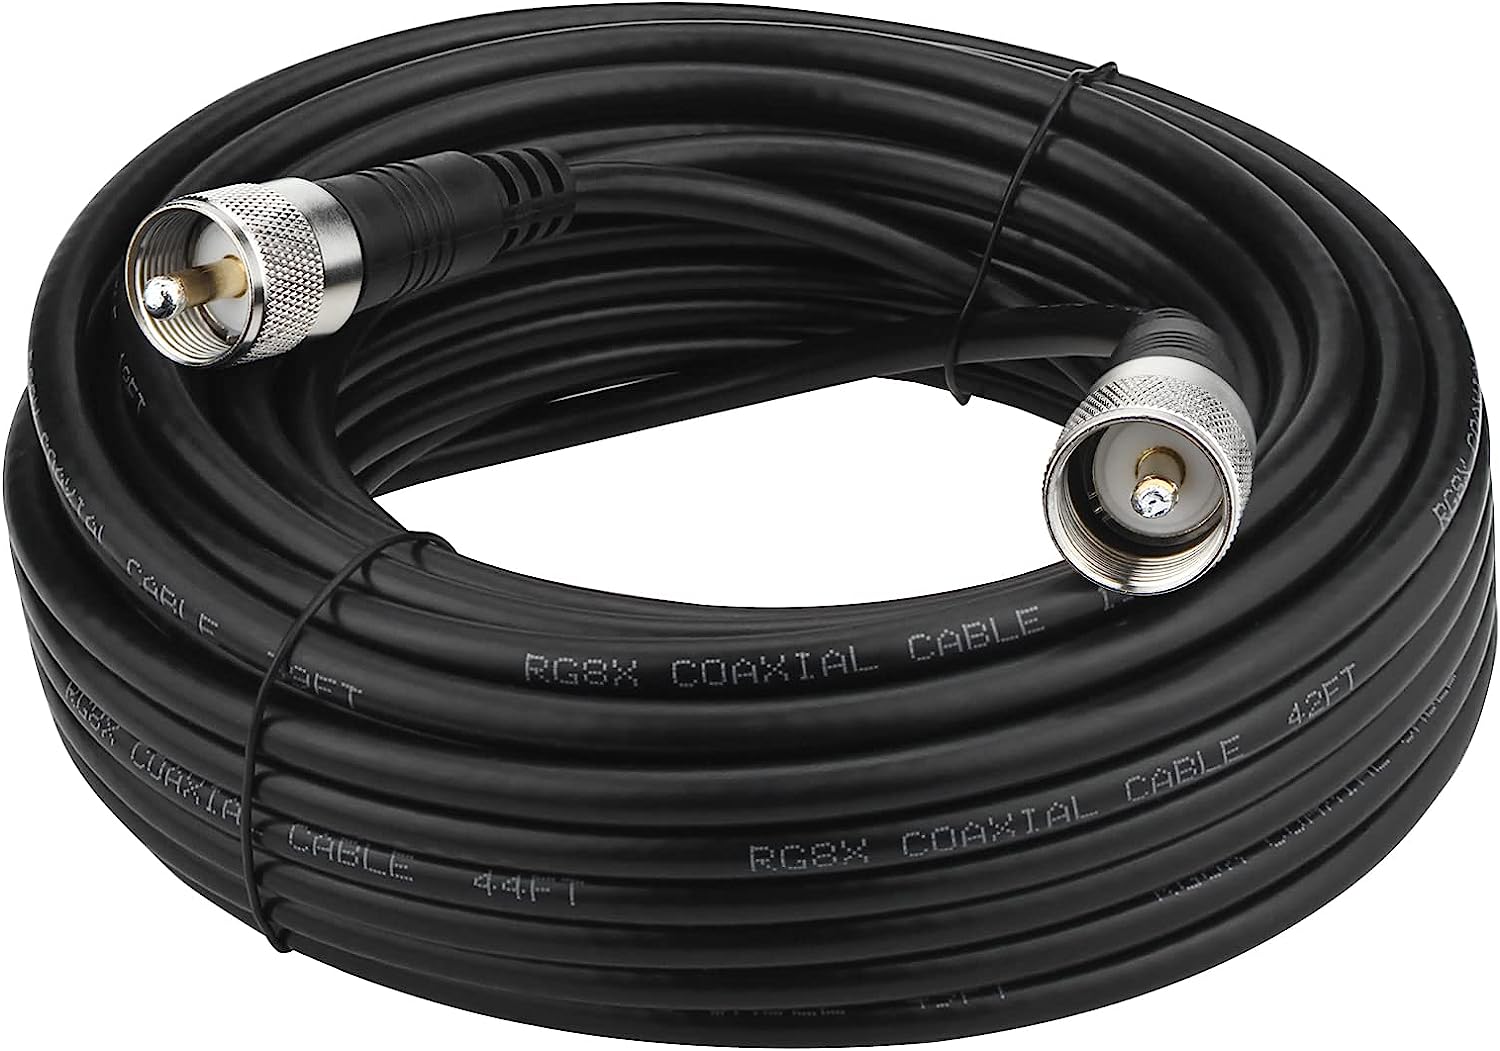 RG8x Coaxial Cable 50 ft, CB Radio Antenna Coax Cable [...]